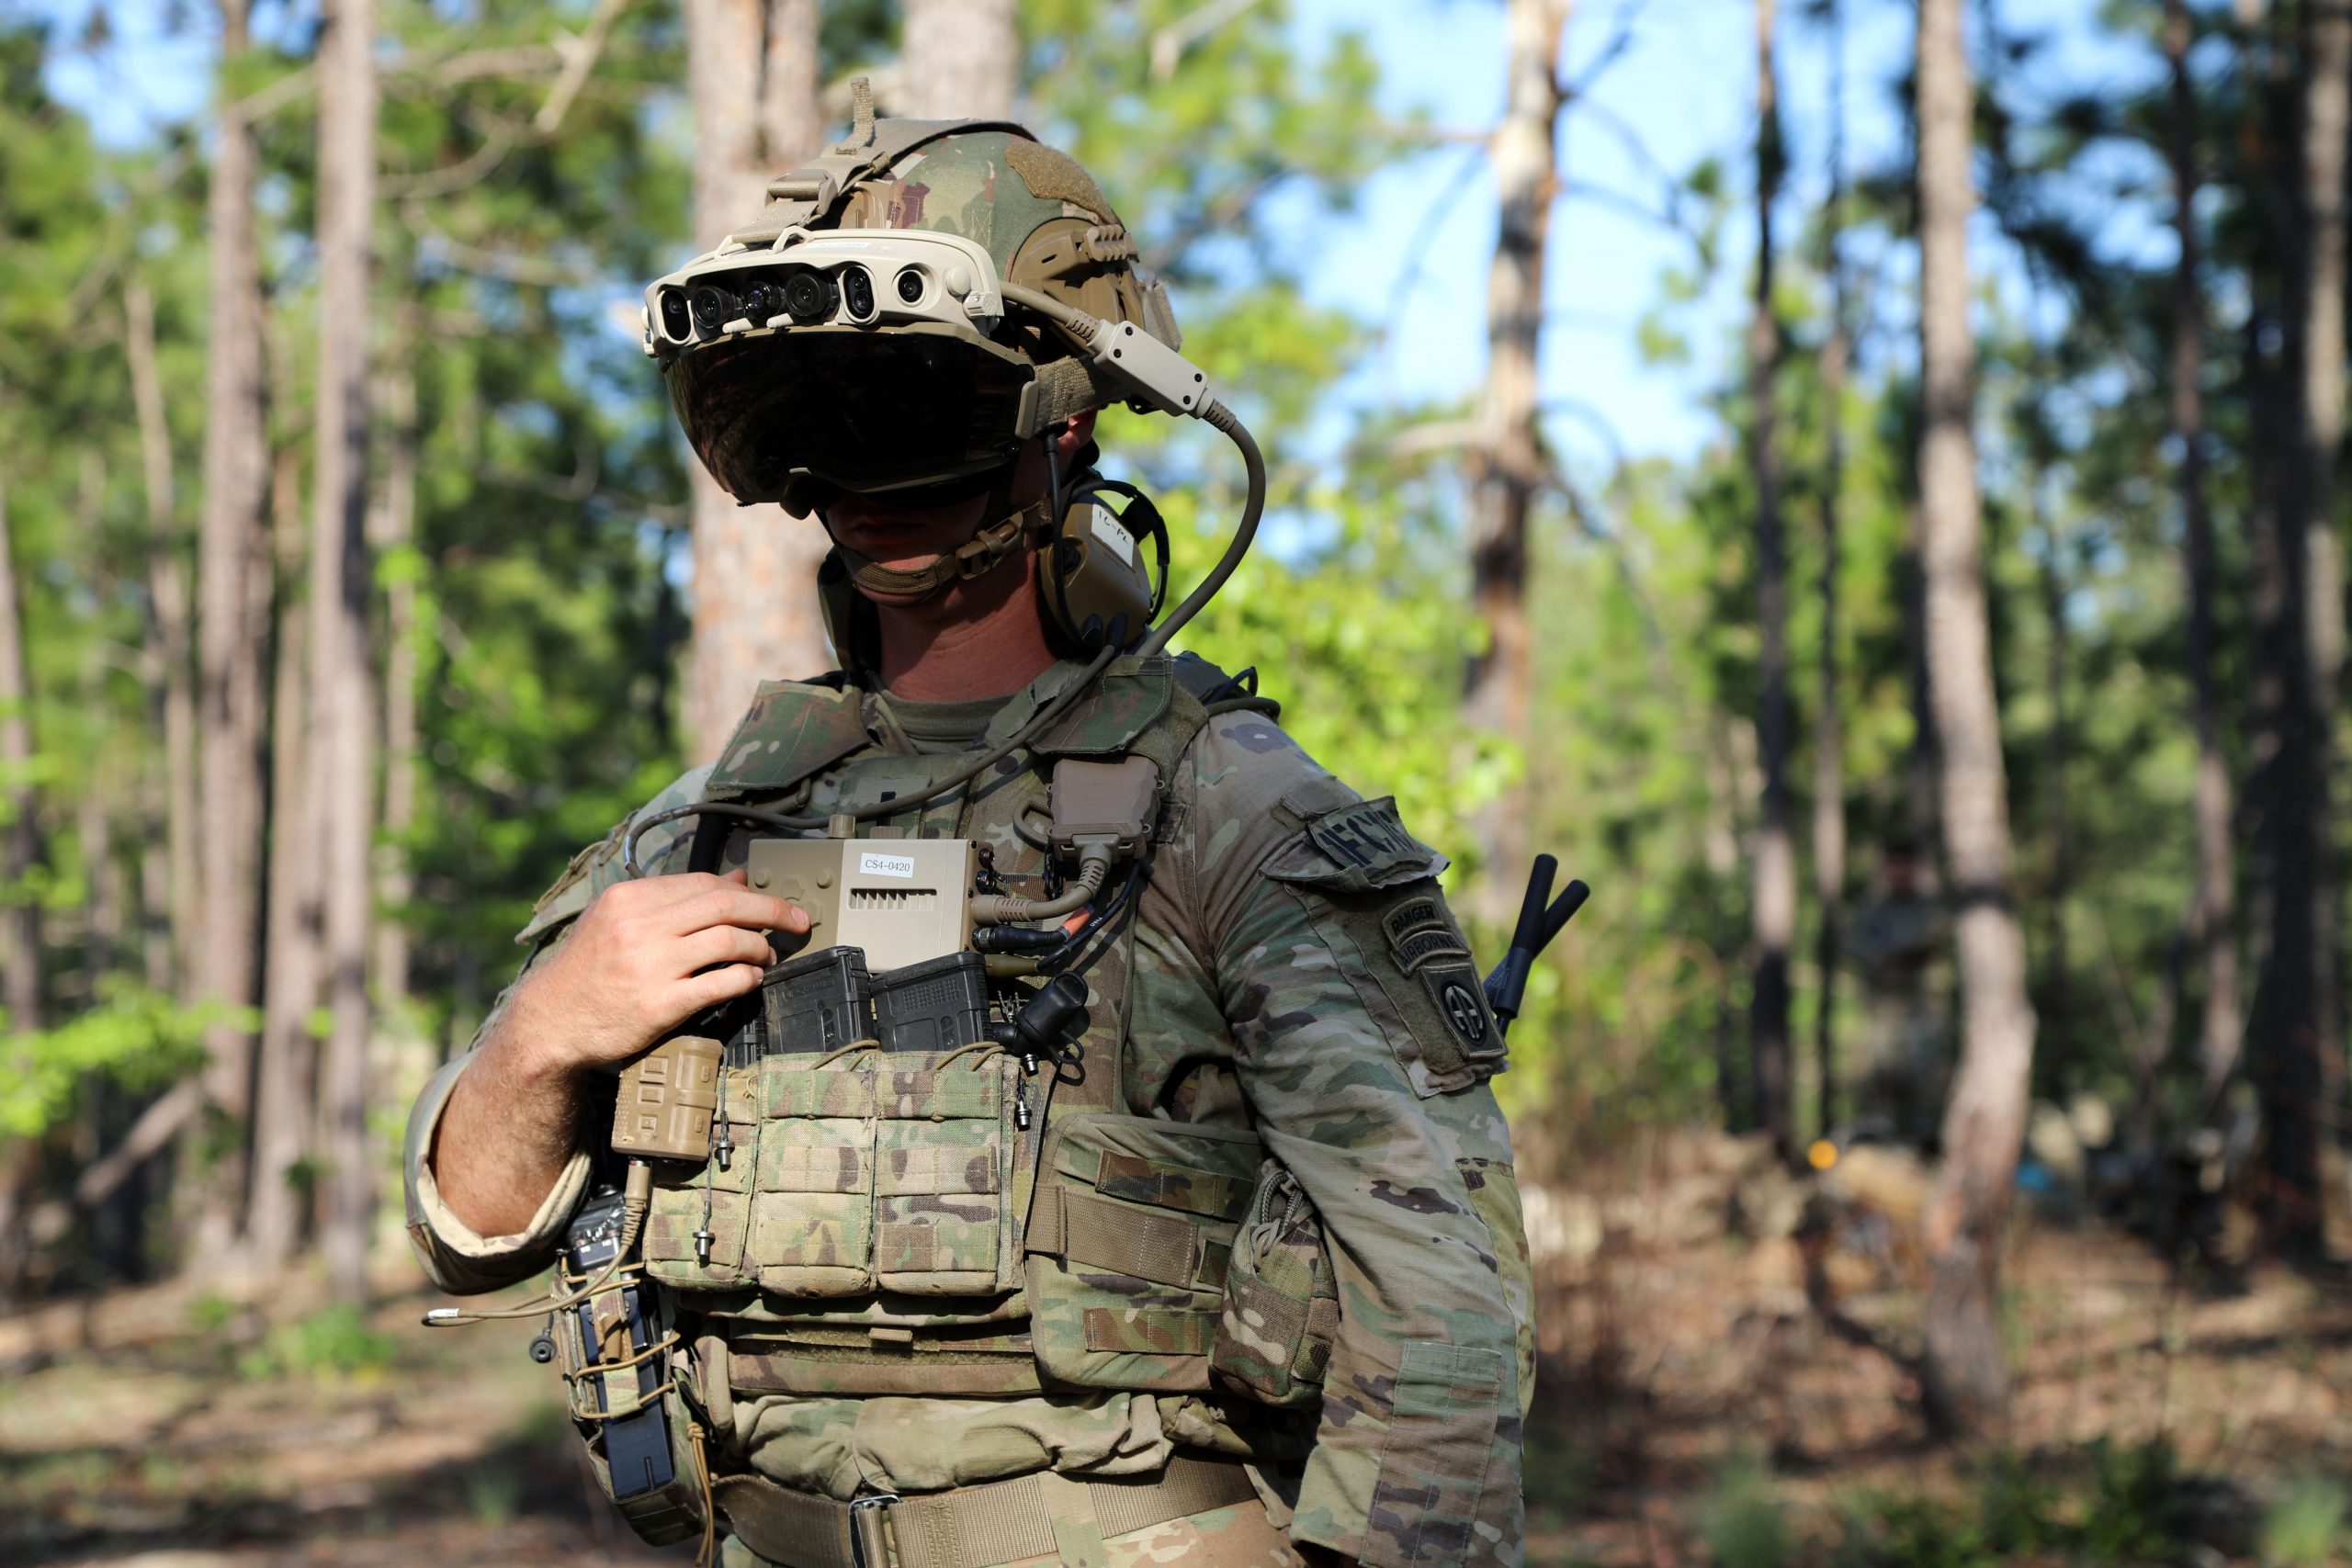 Since its soldiers are no longer vomiting, the US Army is ordering new augmented reality headsets from Microsoft